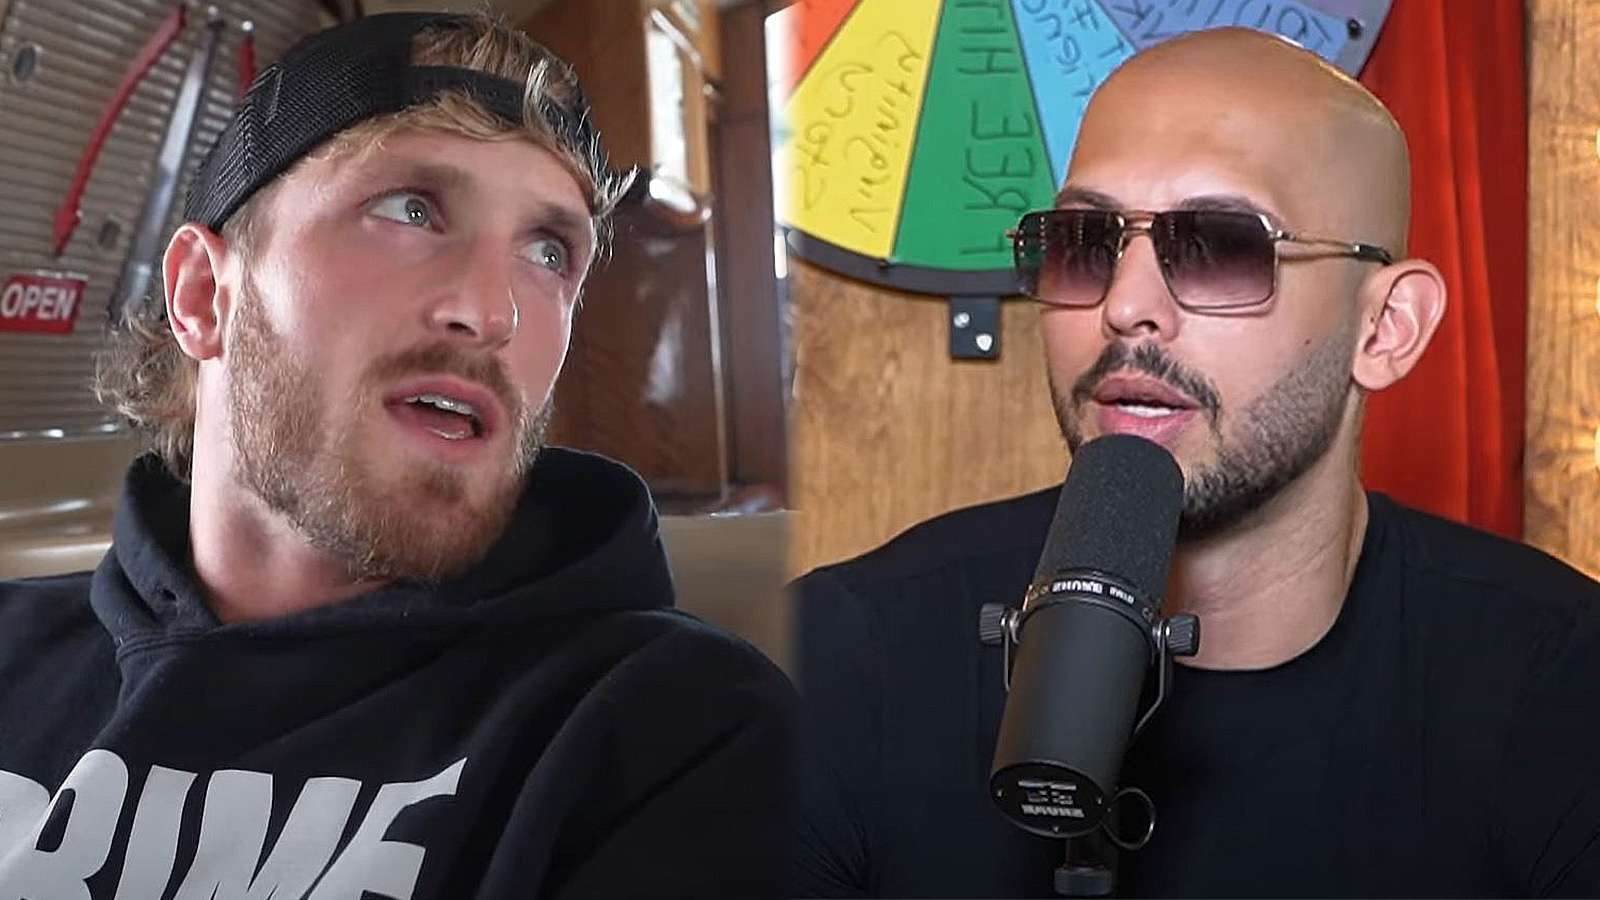 Logan Paul says he would fight Andrew Tate